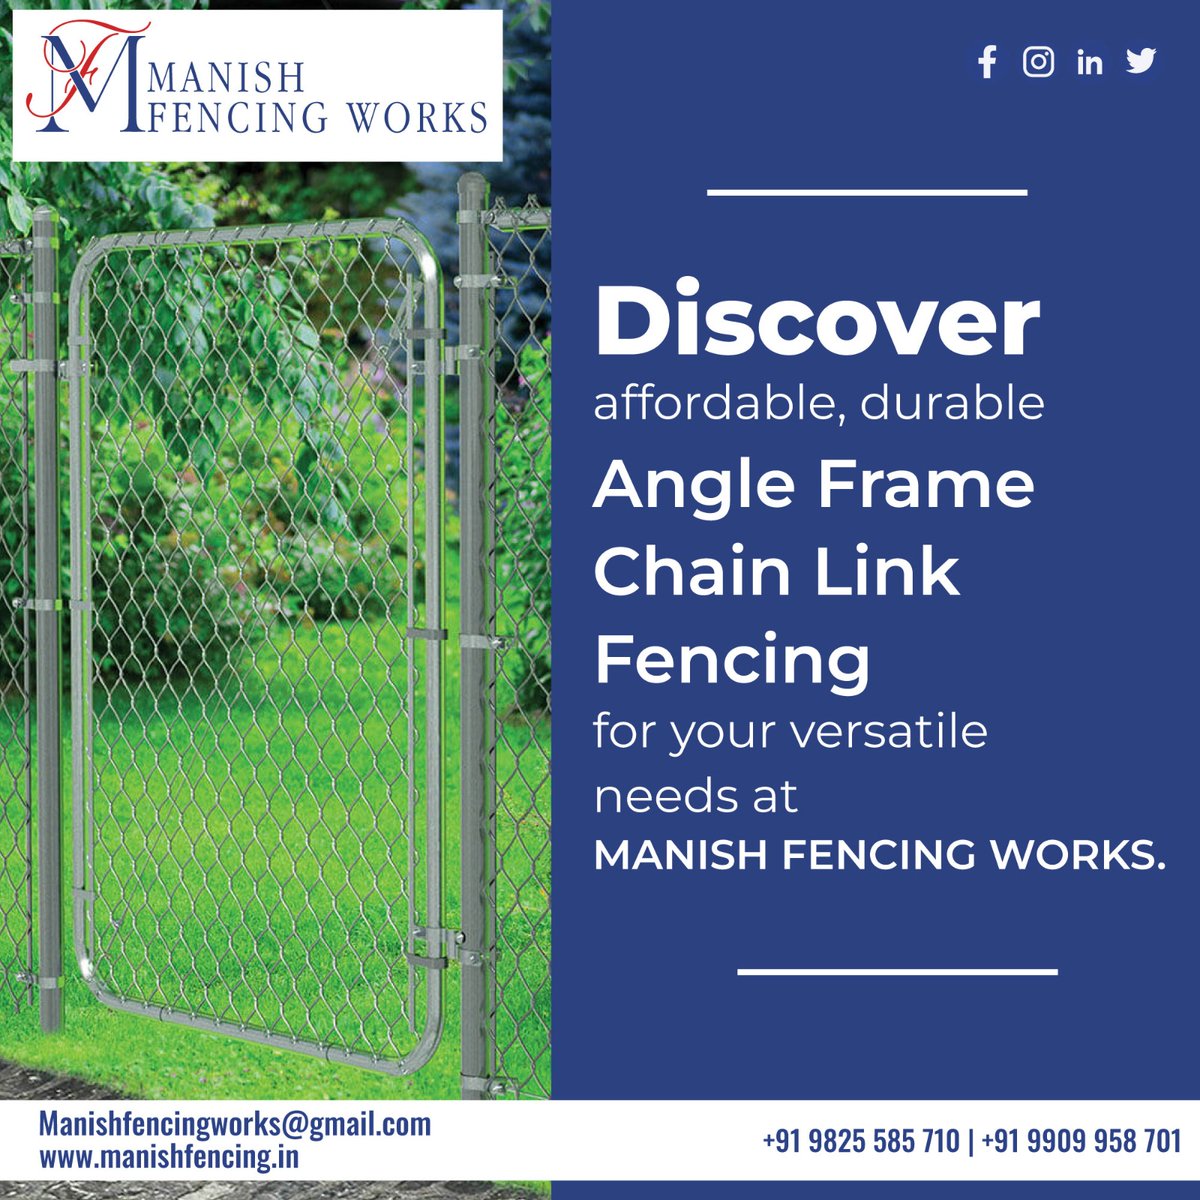 Discover affordable and durable angle frame chain link fencing for versatile needs at Manish Fencing Works. 

#ManishFencingWorks #angleframe #chainlink #ReliableDefense #bestquality #FencingSolutions #SafeAndSecure #GetFenced #FencingInstallation #wire #wirefencing #ahmedabad